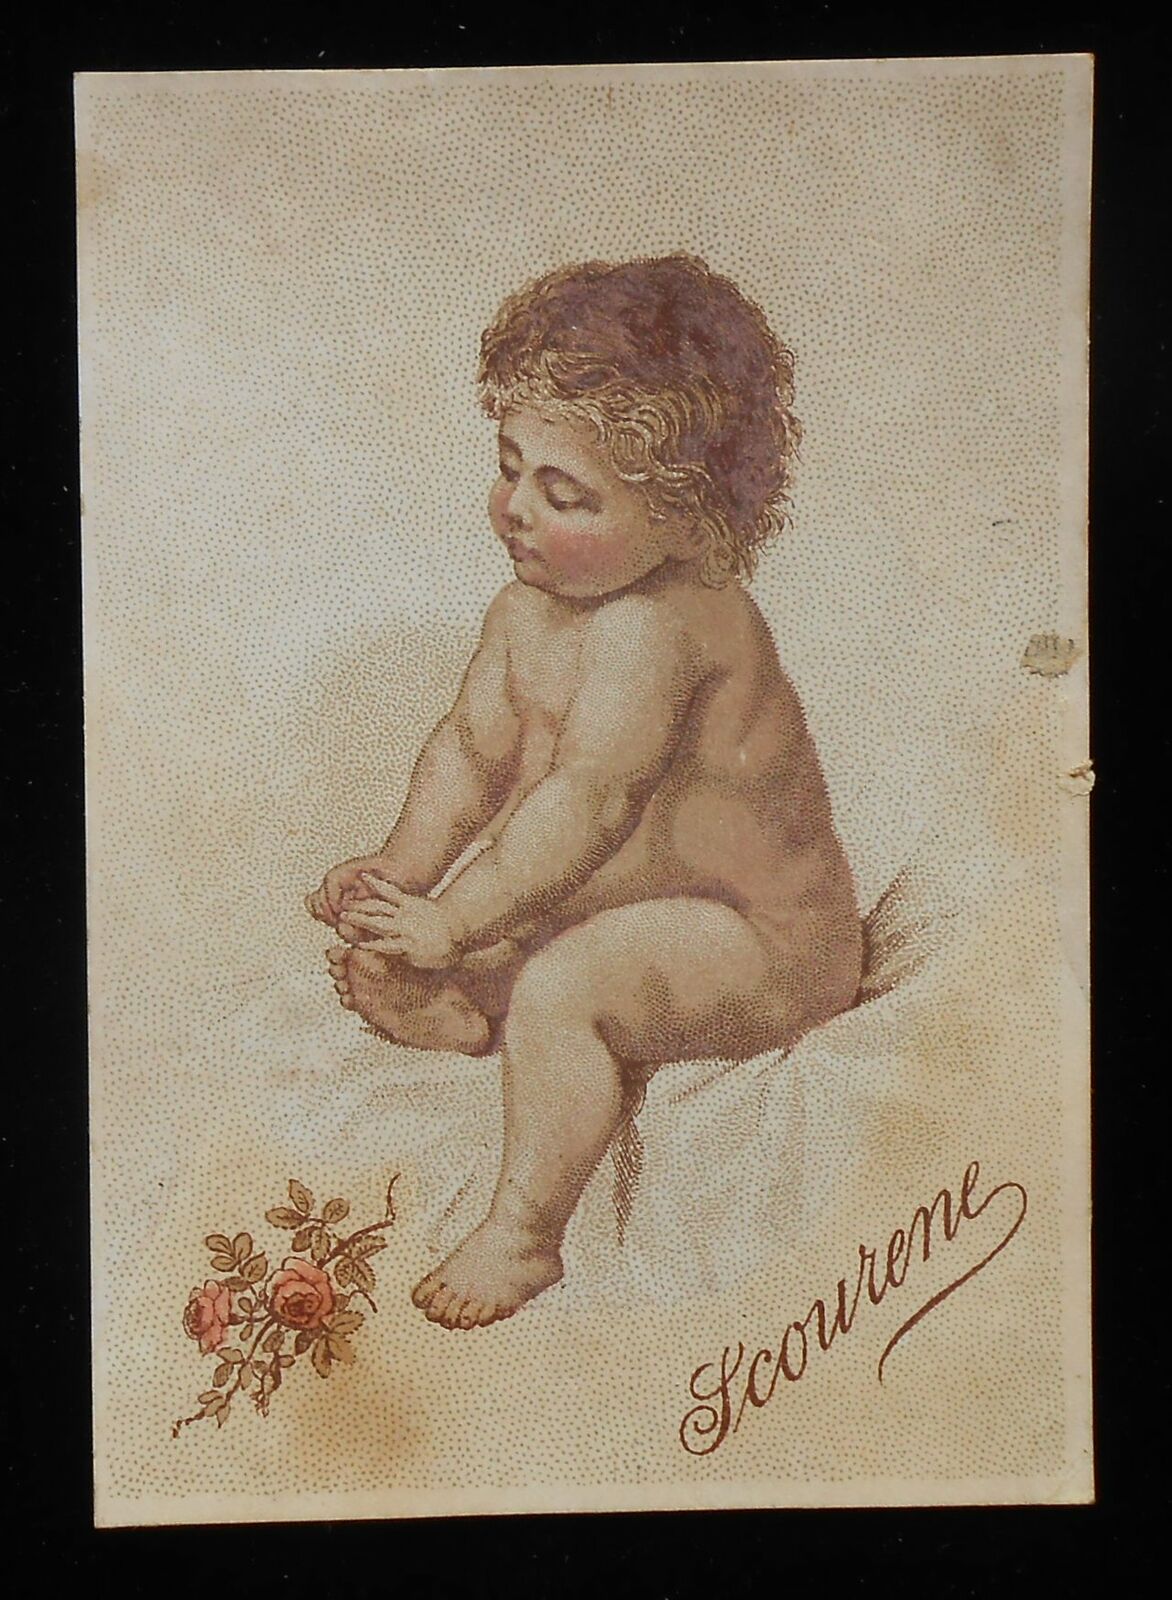 1880s VTC Baby Finding Thorn on Toe Scourene Scouring Soap Simonds Soap Co. NYC 